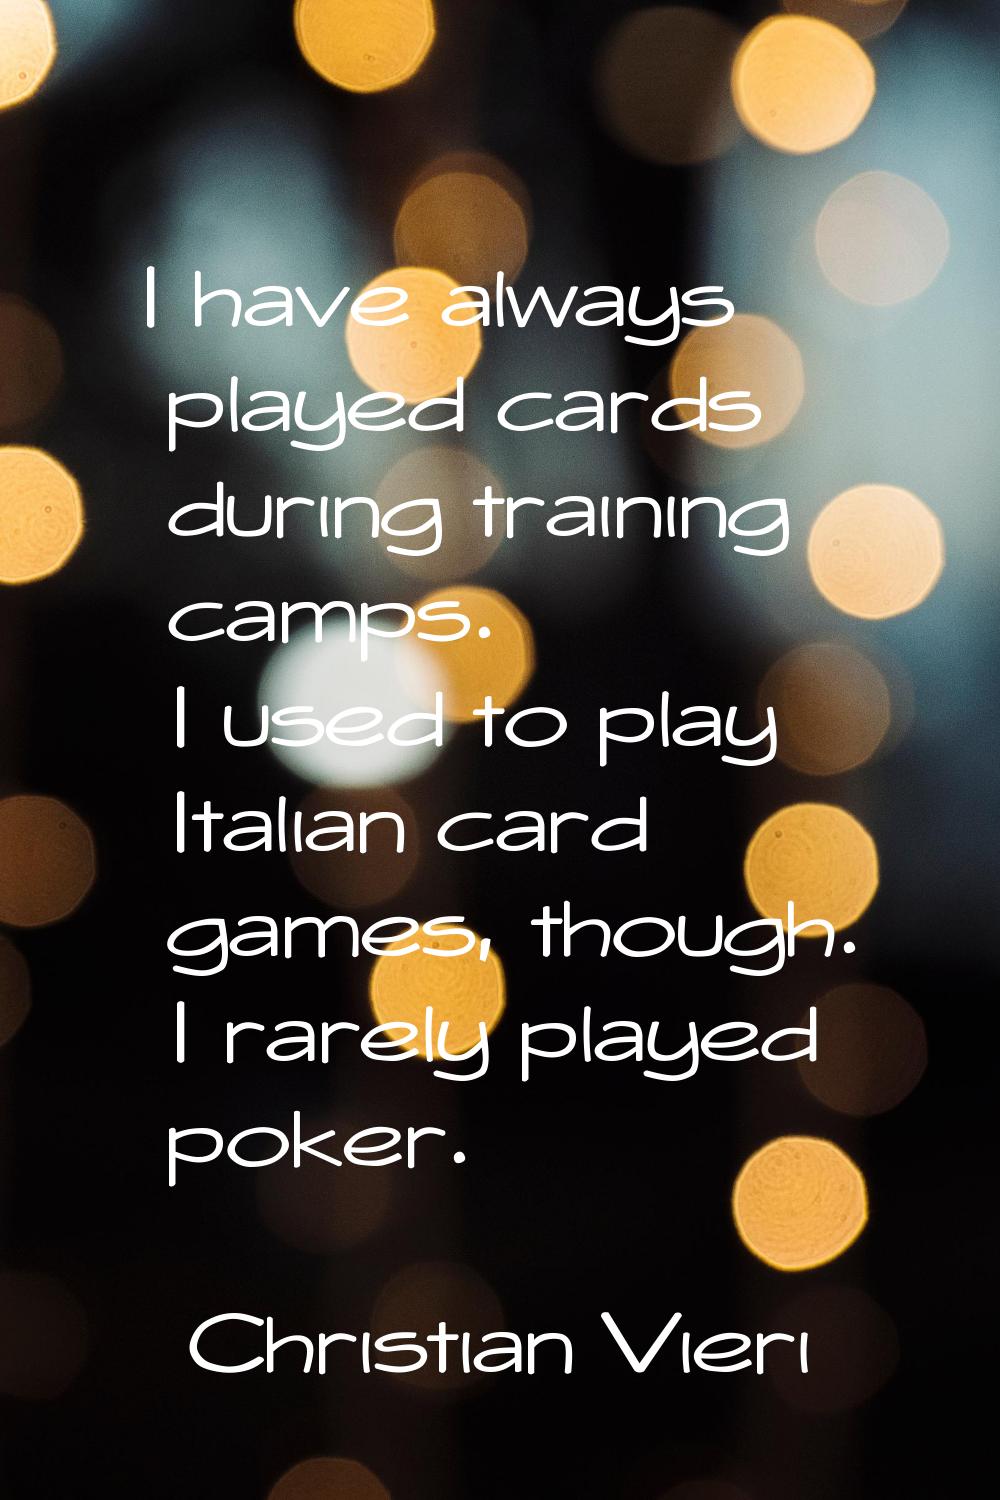 I have always played cards during training camps. I used to play Italian card games, though. I rare